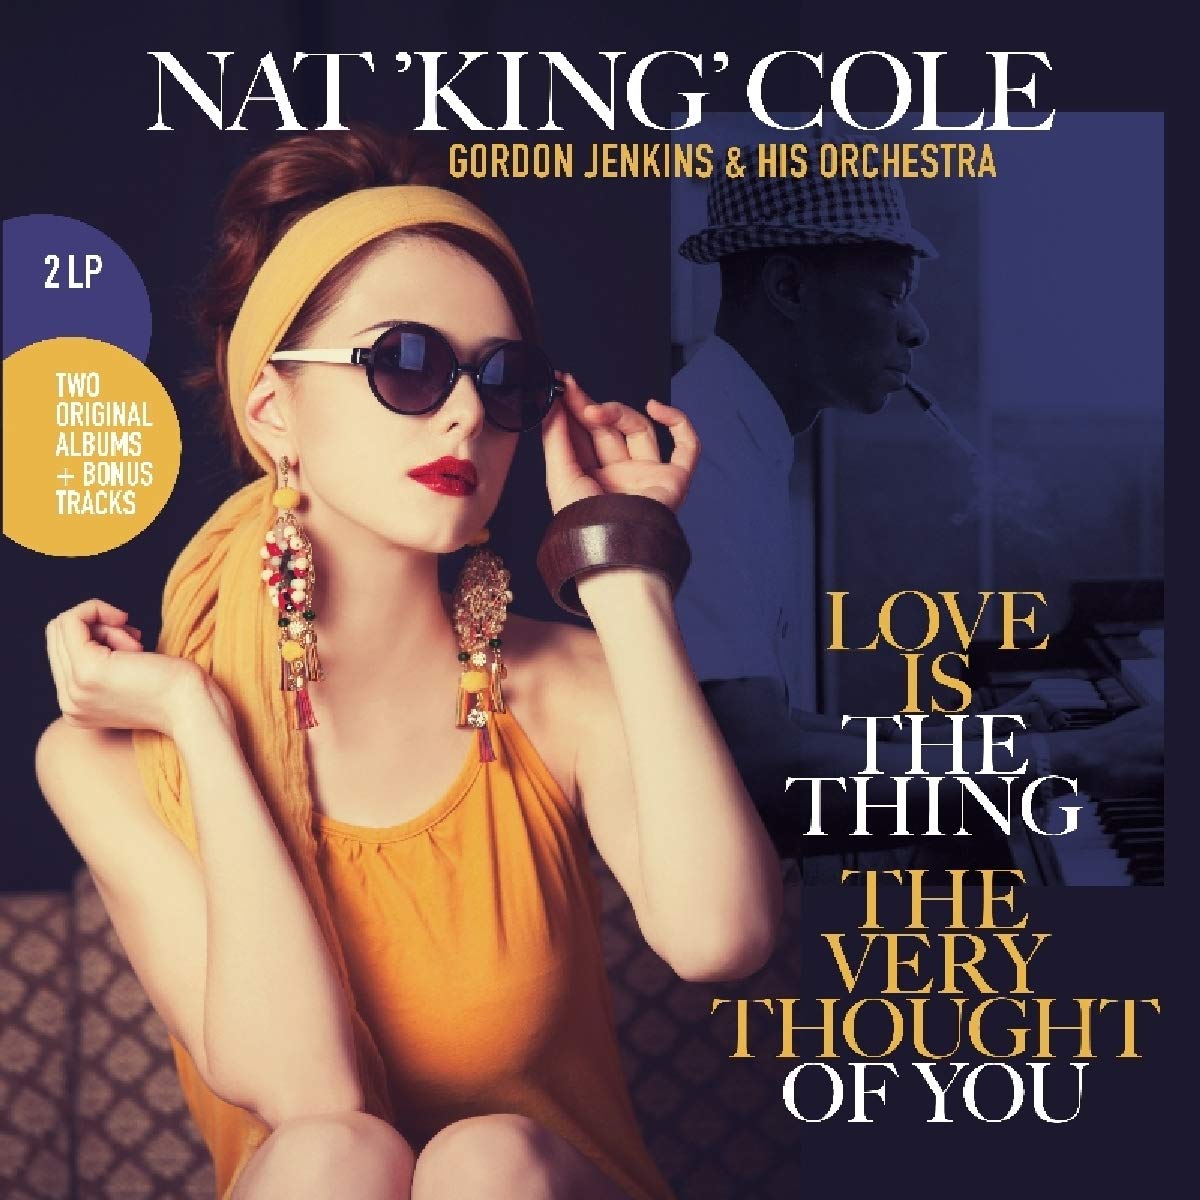 Nat King Cole - Love Is The Thing/The Very Thought Of You - 2 x LP